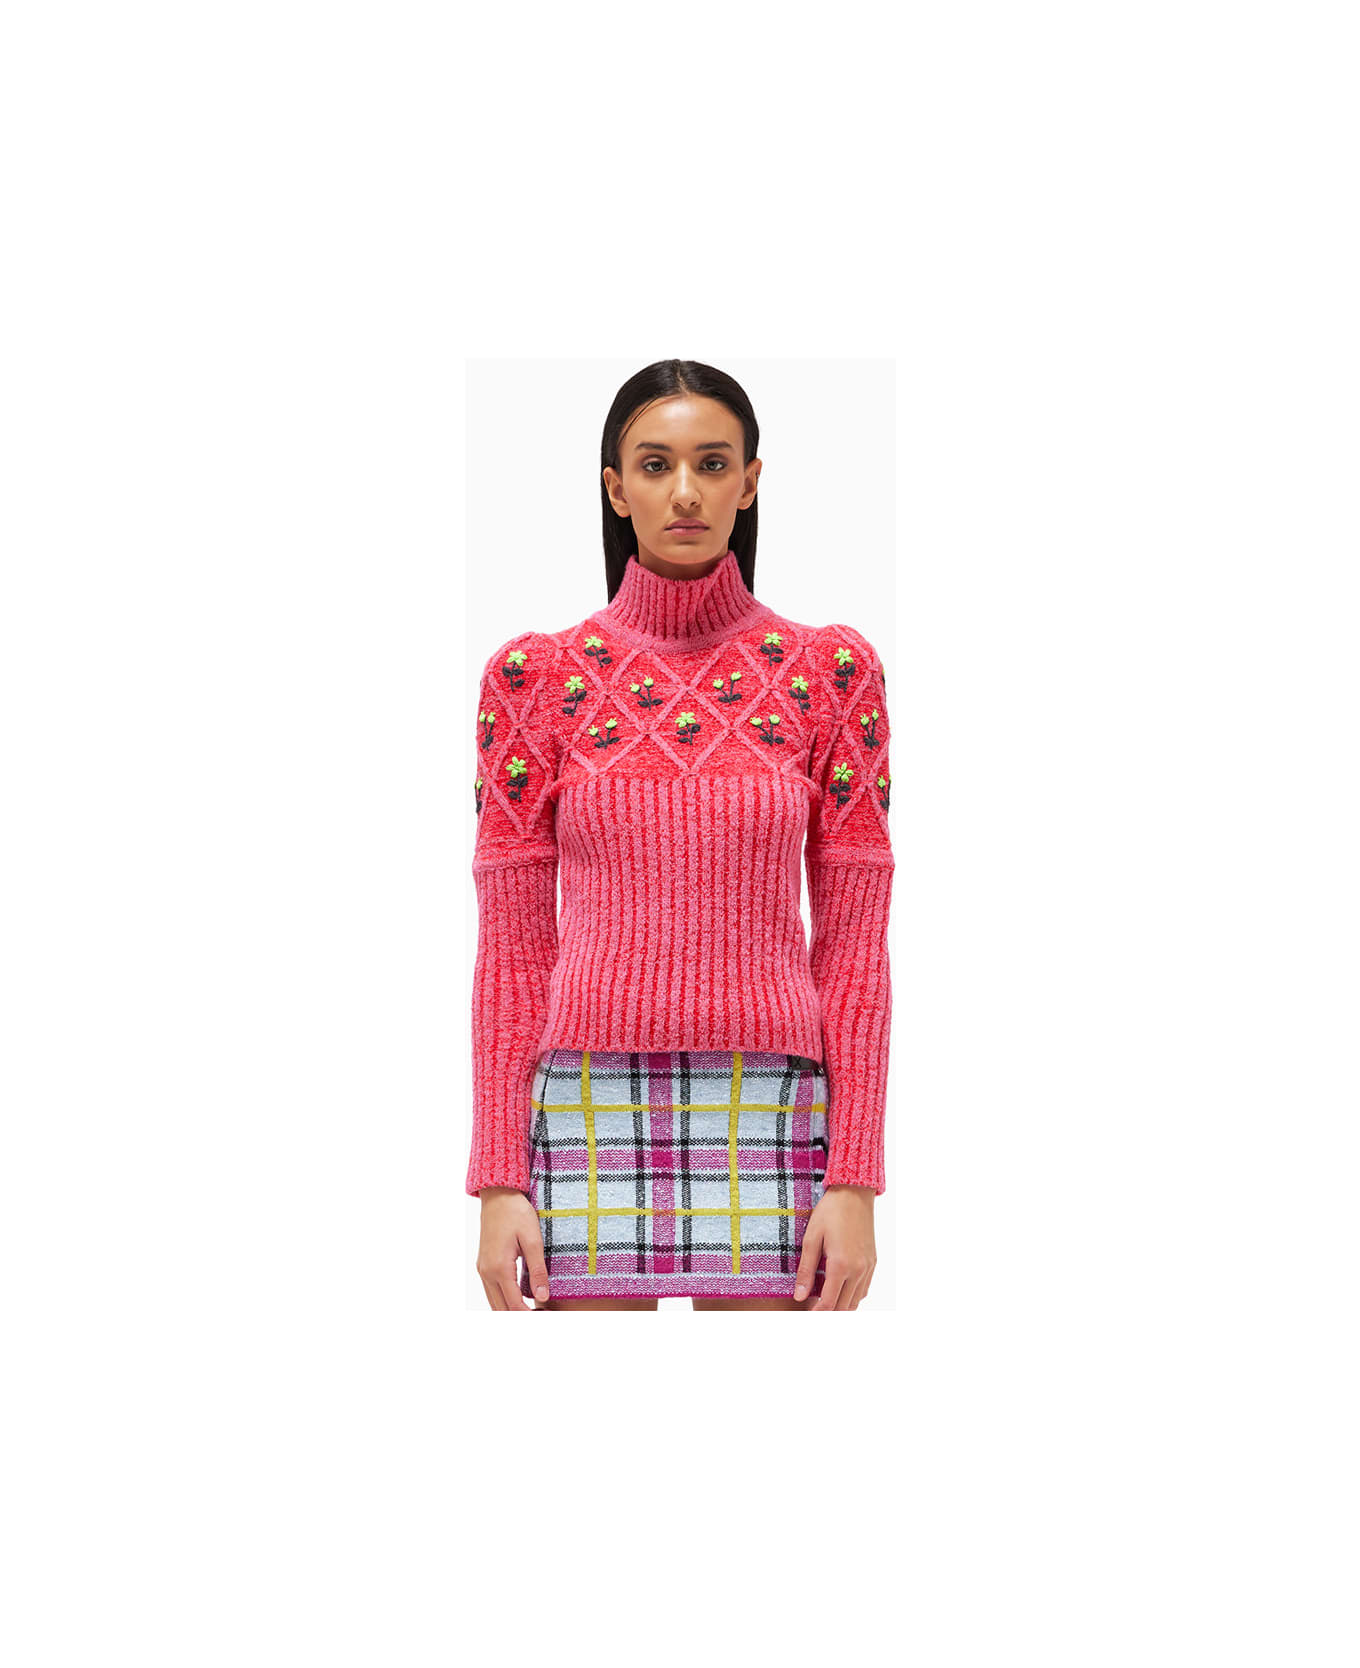 Cormio Oma Sweater - RED